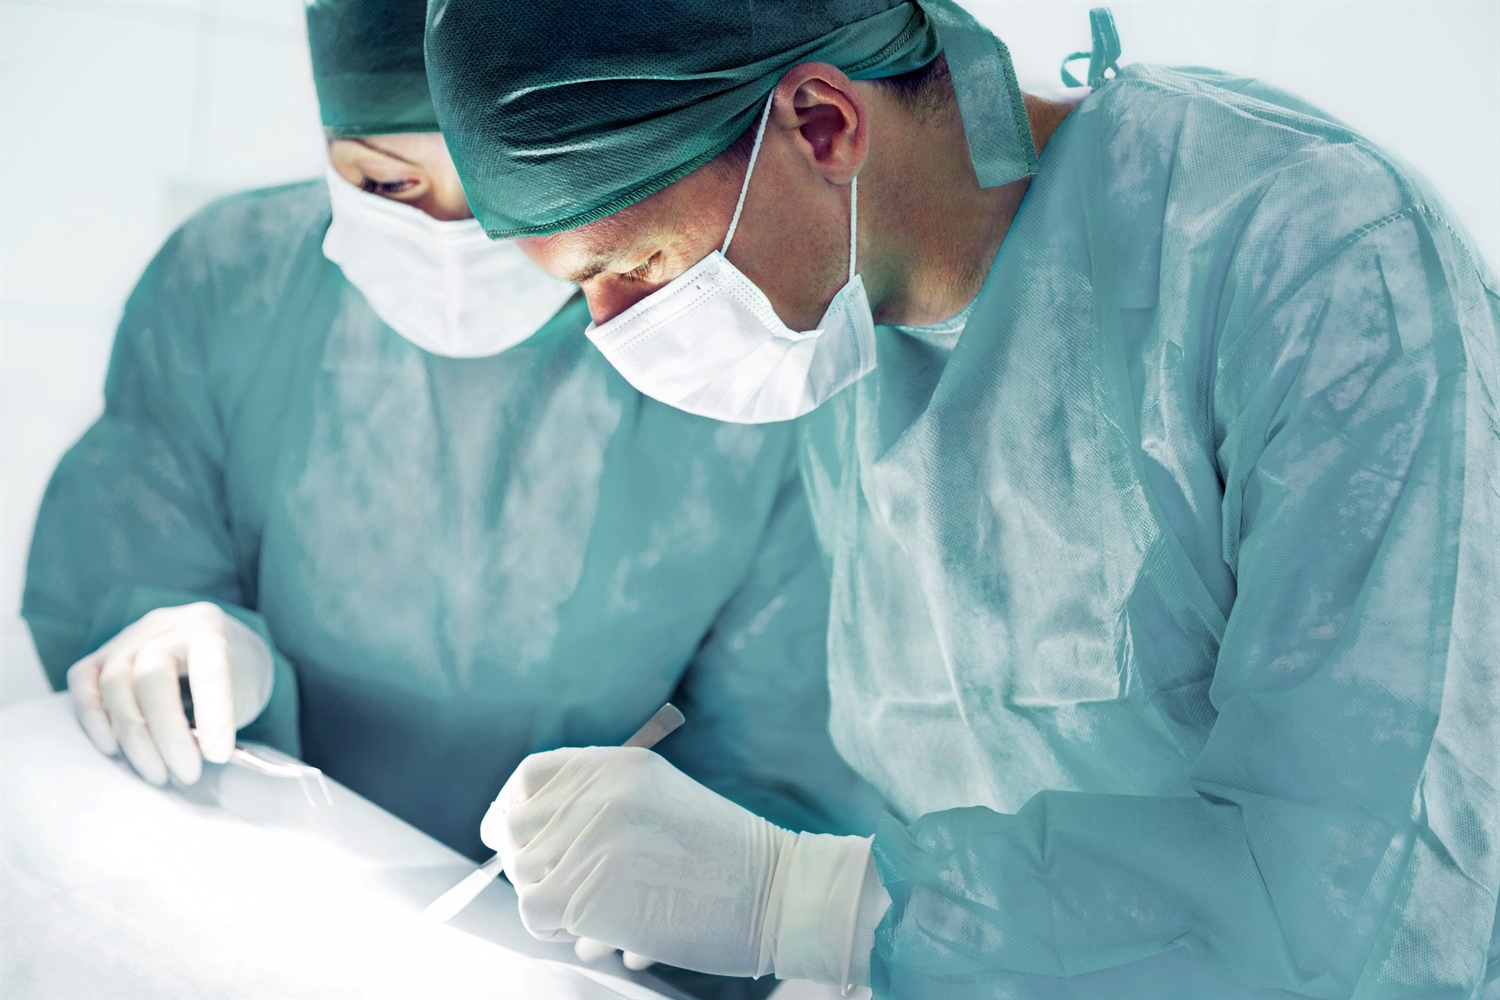 Complication Insure covers expenses related to problems that could be associated with all surgery procedures.